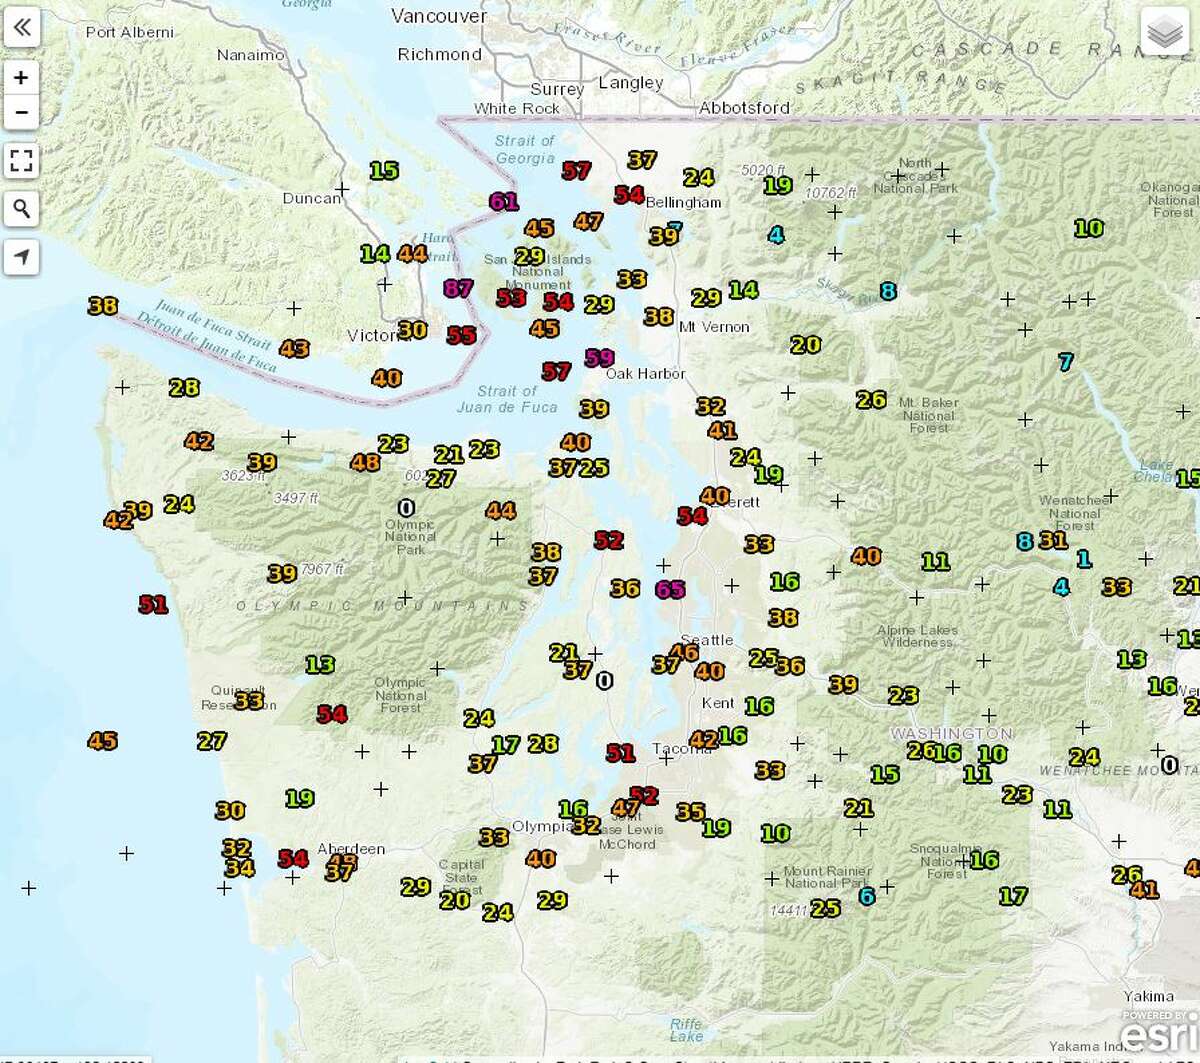 This image from the National Weather Service's observations site at about 1:30 p.m. shows maximum wind gusts over the last 24 hours around northwest Washington.